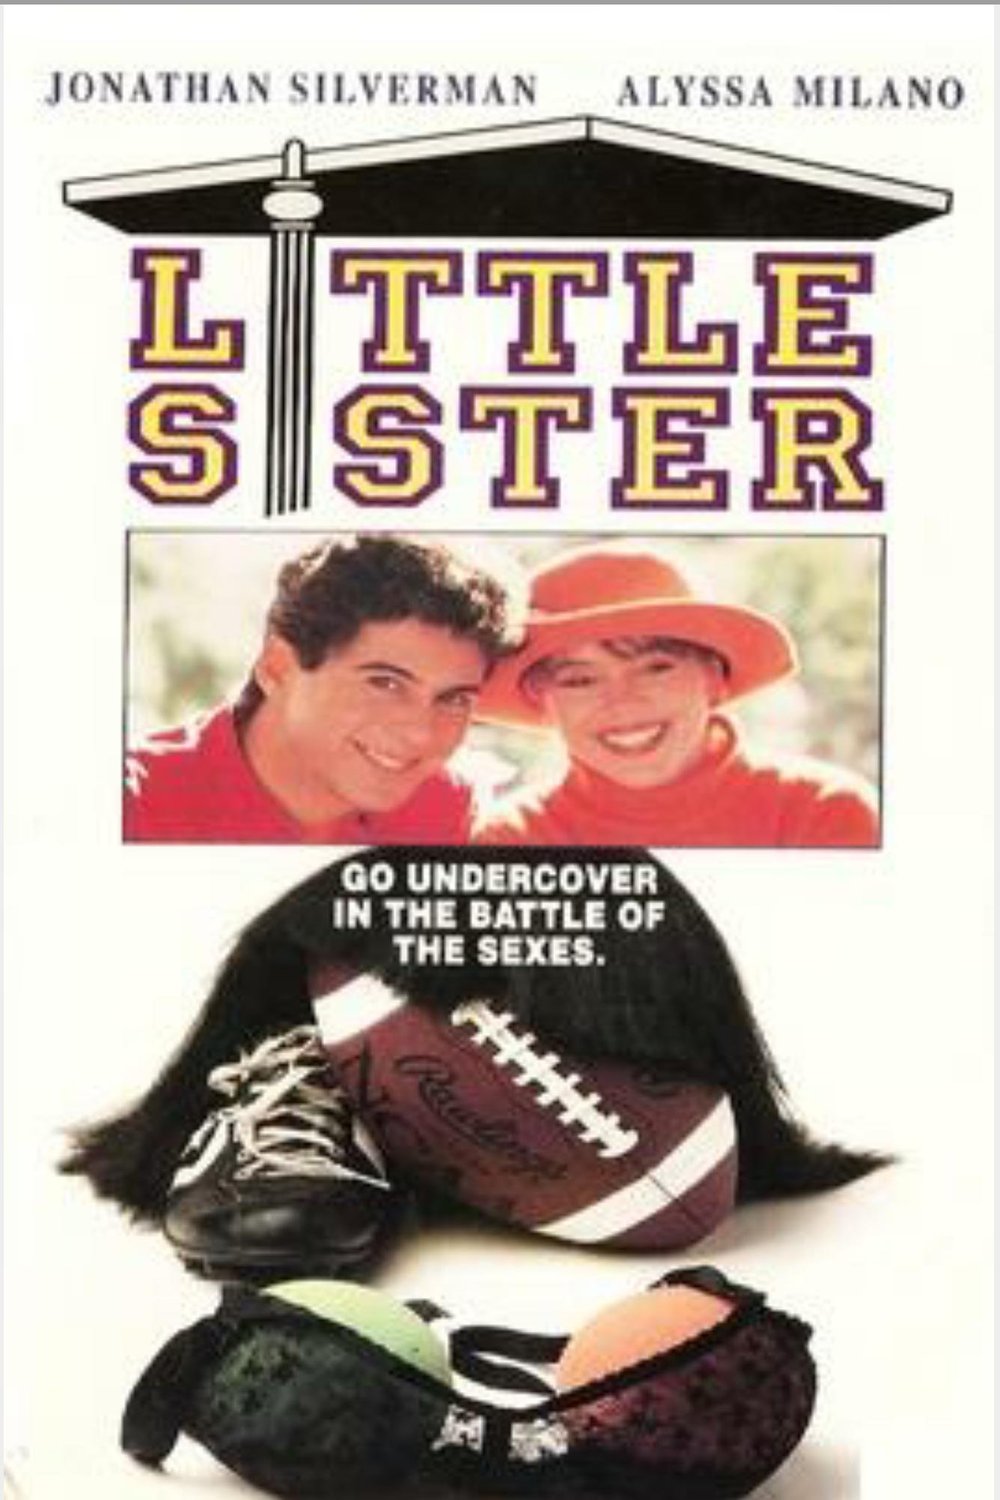 Poster of the movie Little Sister